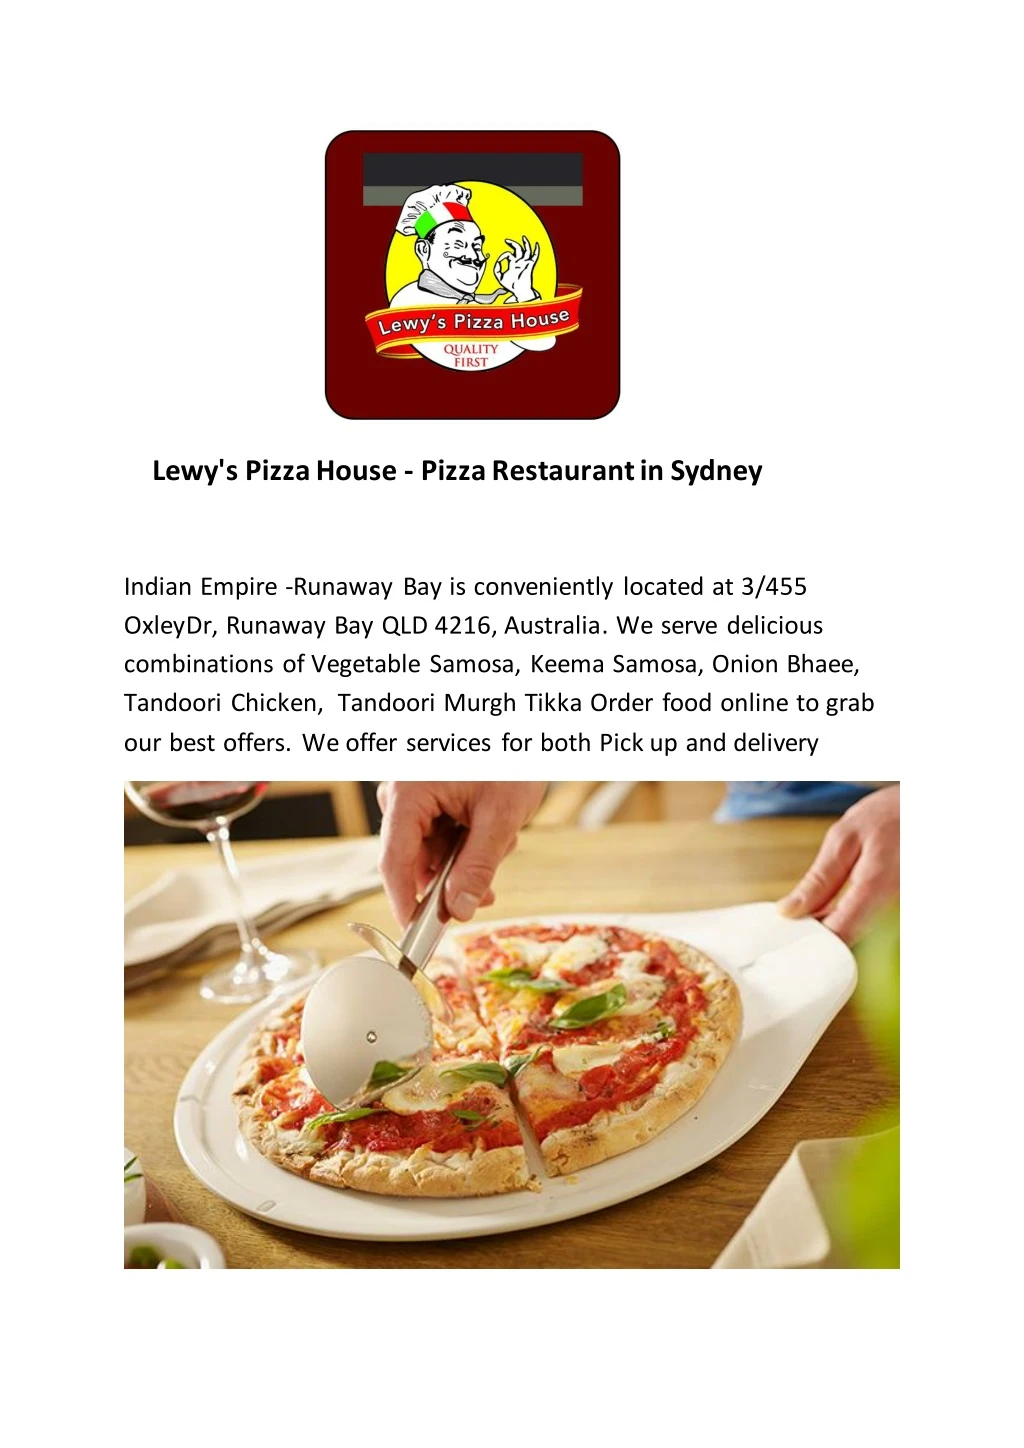 lewy s pizza house pizza restaurant in sydney